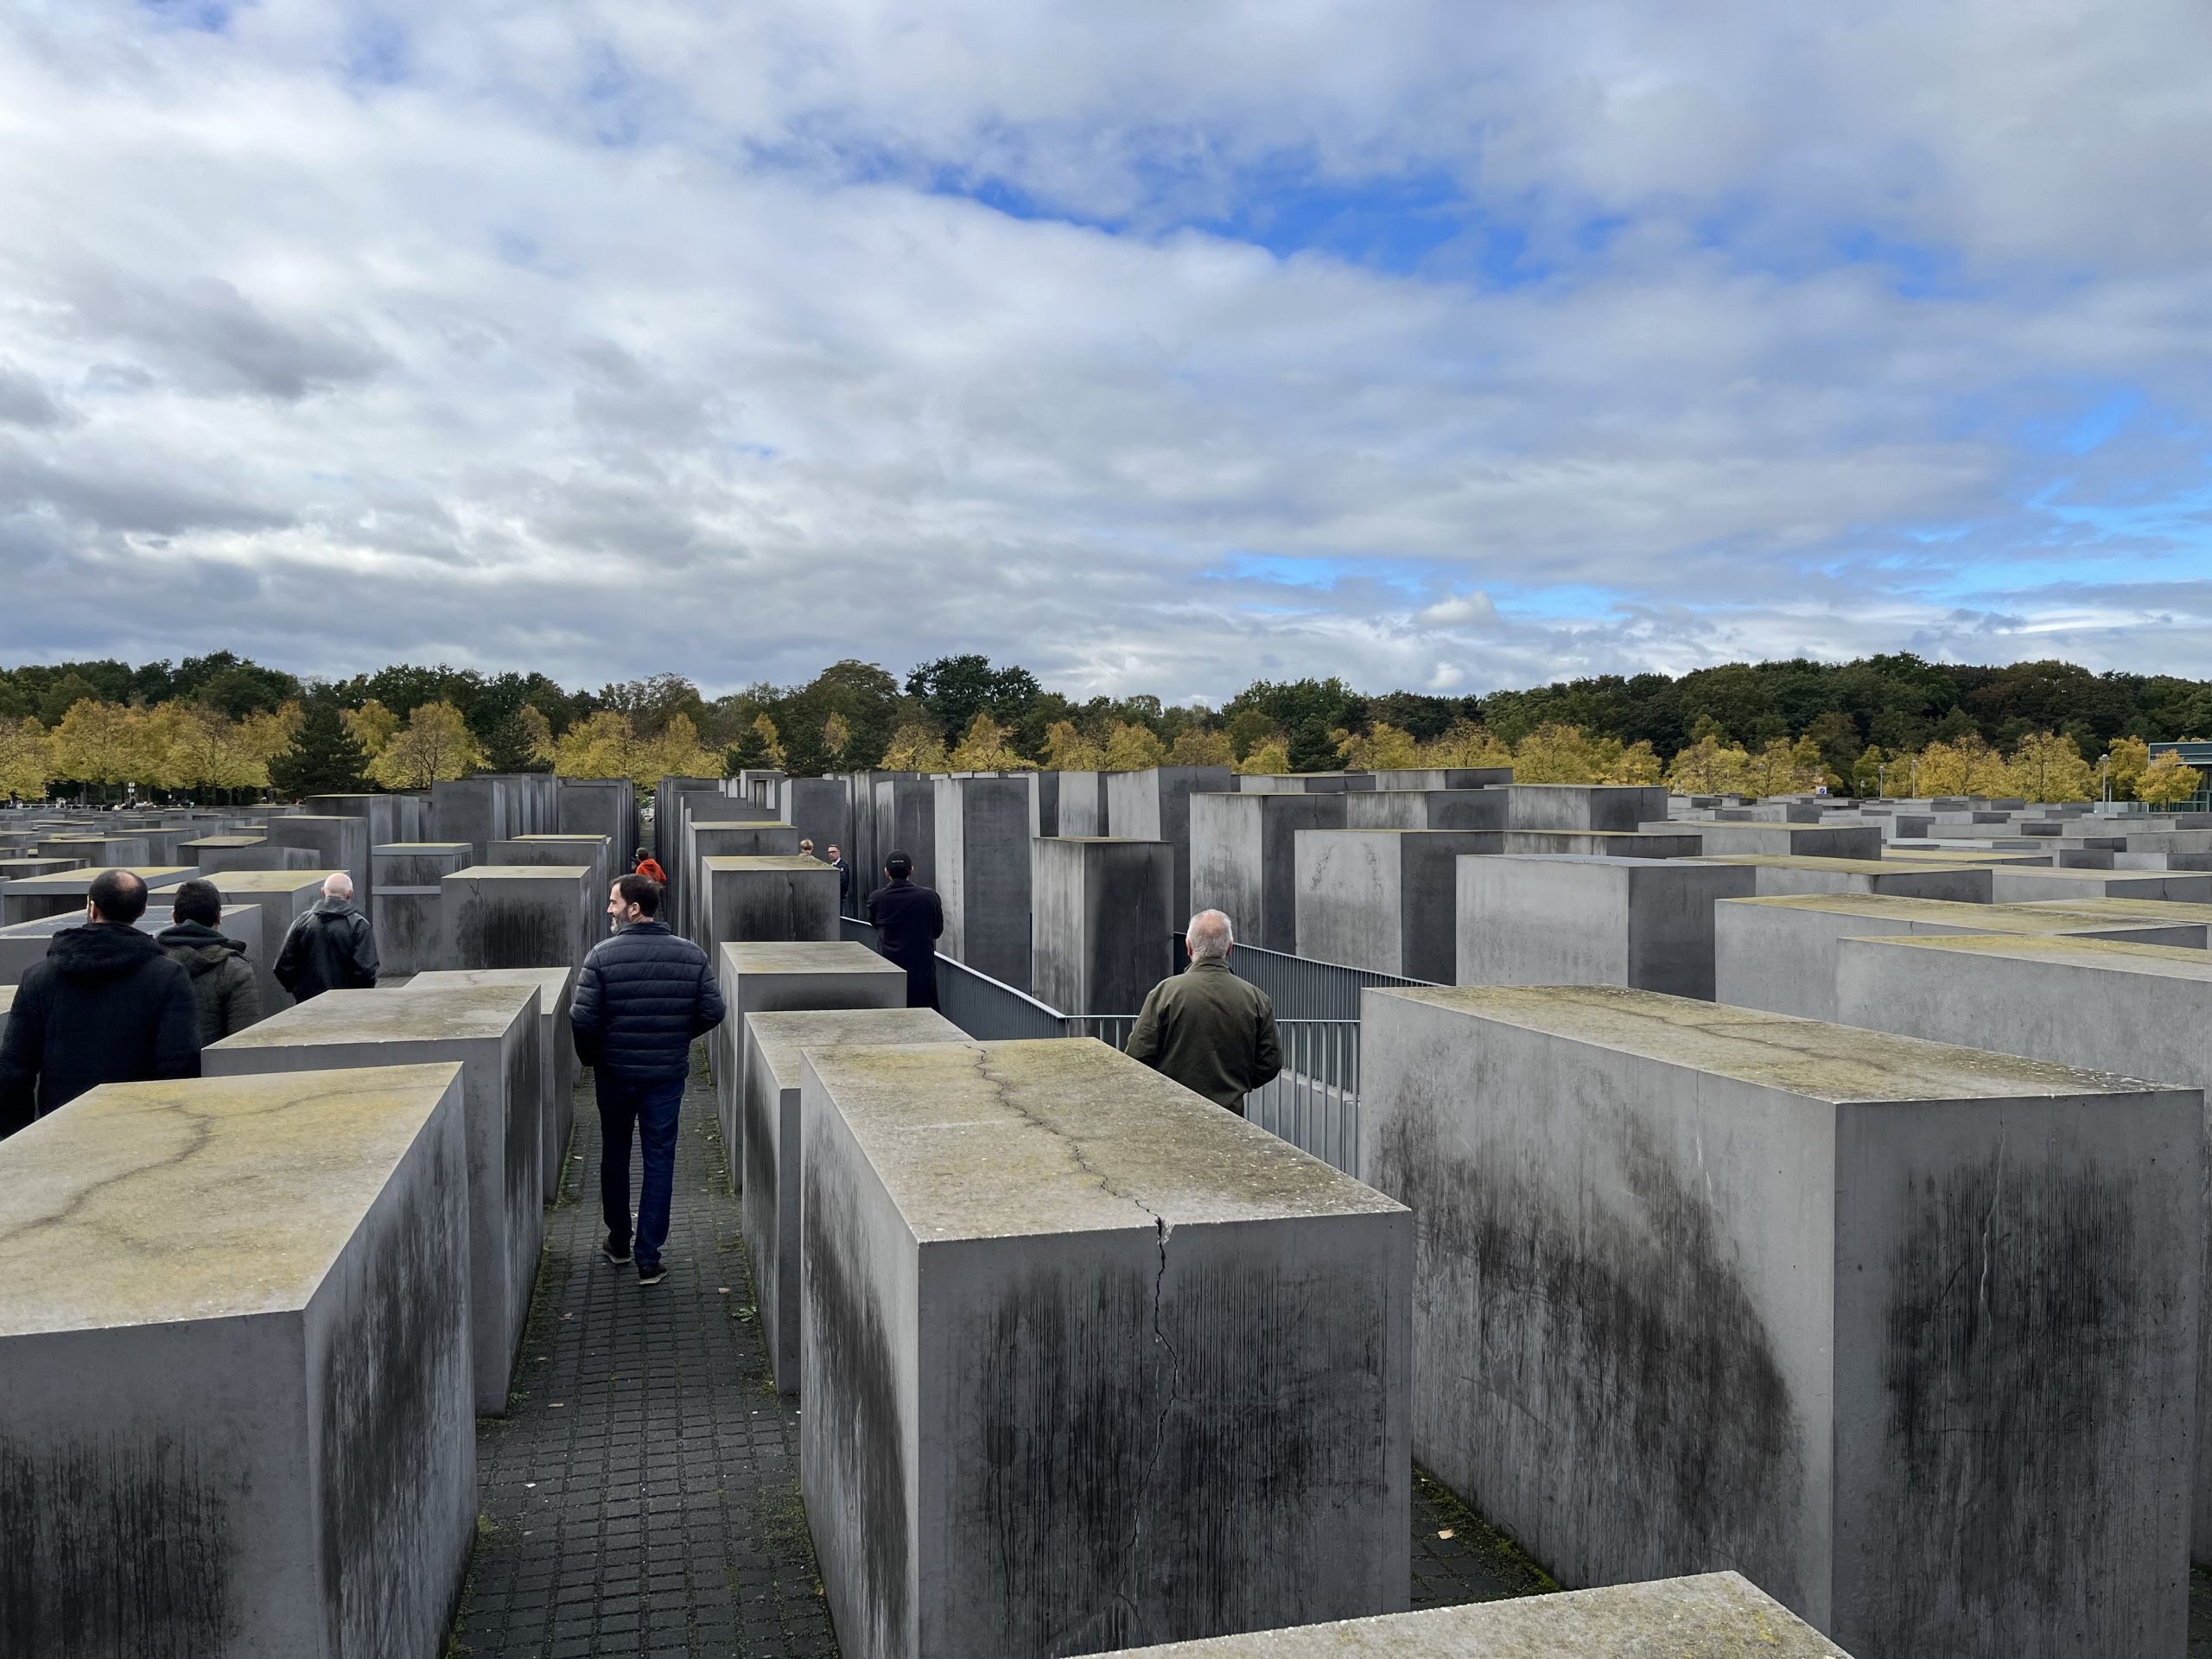 At the edge of the Memorial to the Murdered Jews of Europe